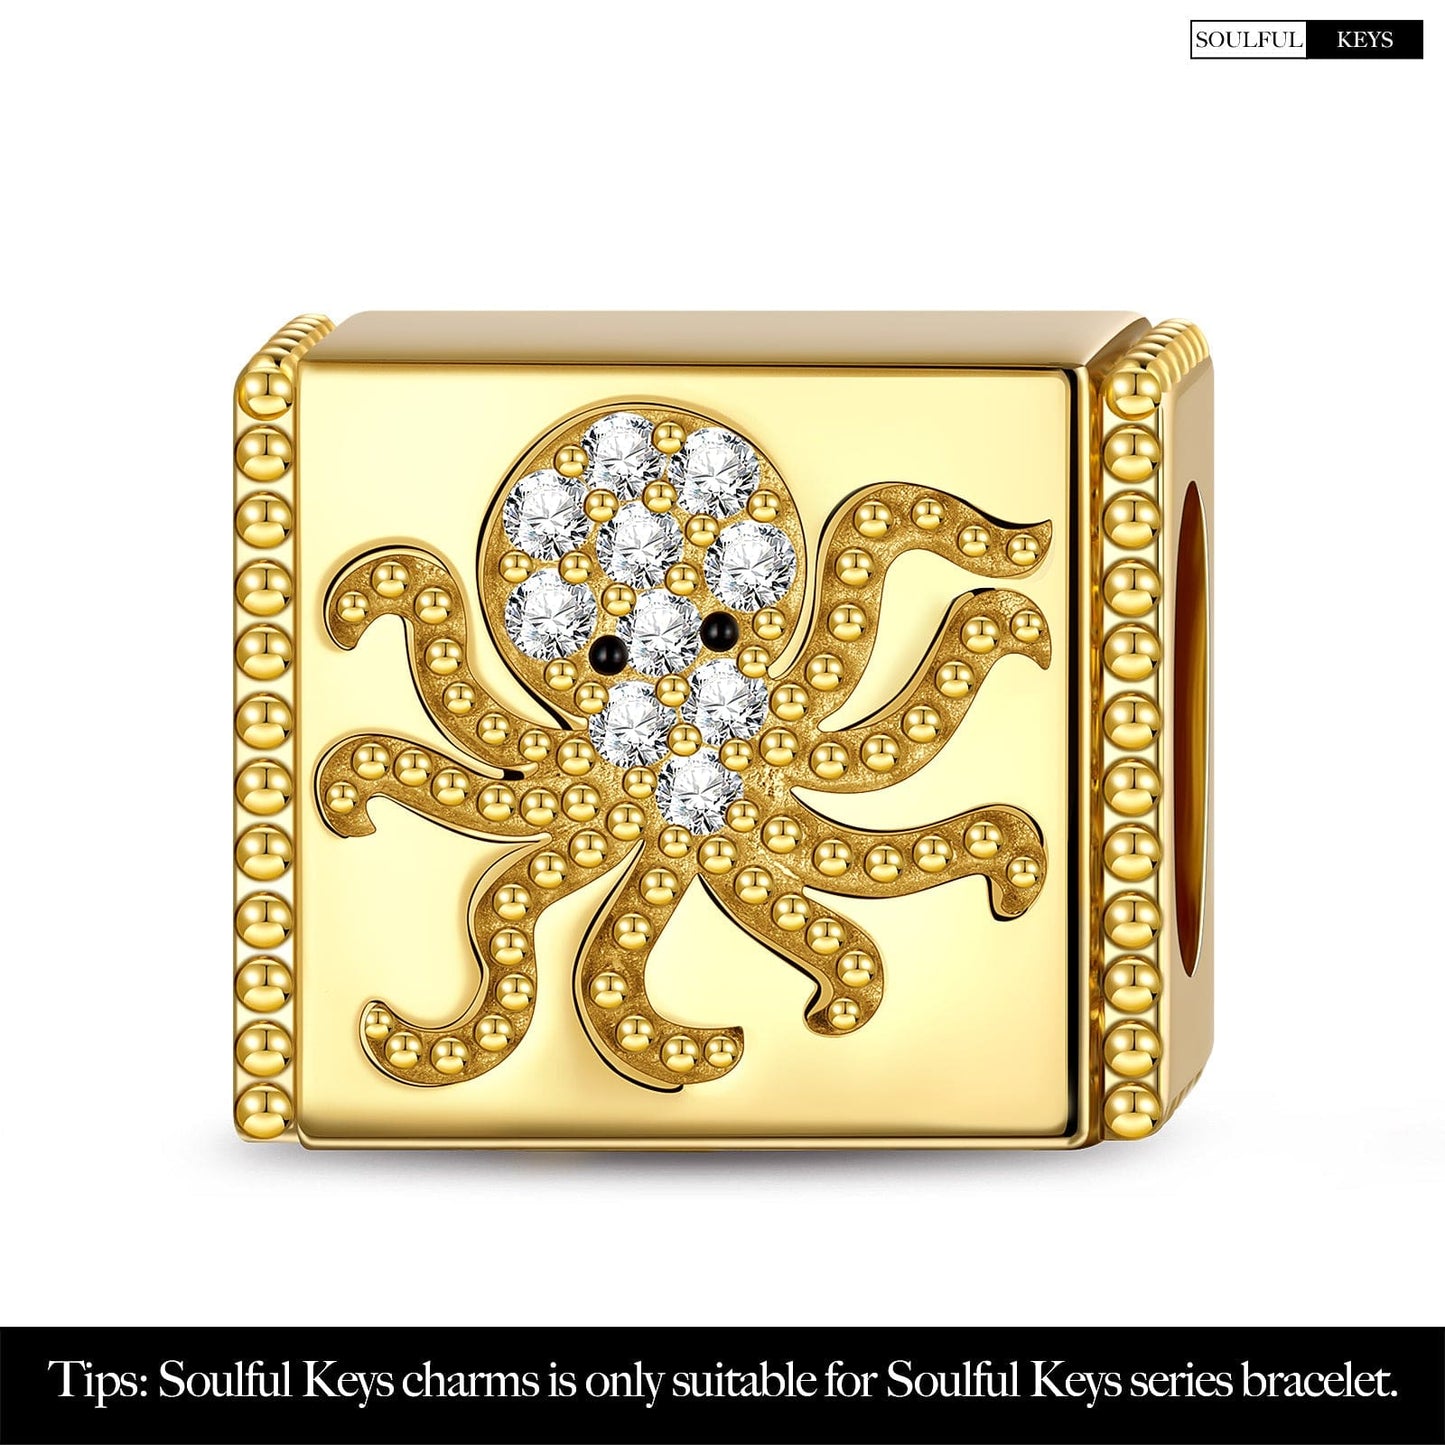 Elusive Octopus Tarnish-resistant Silver Rectangular Charms In 14K Gold Plated